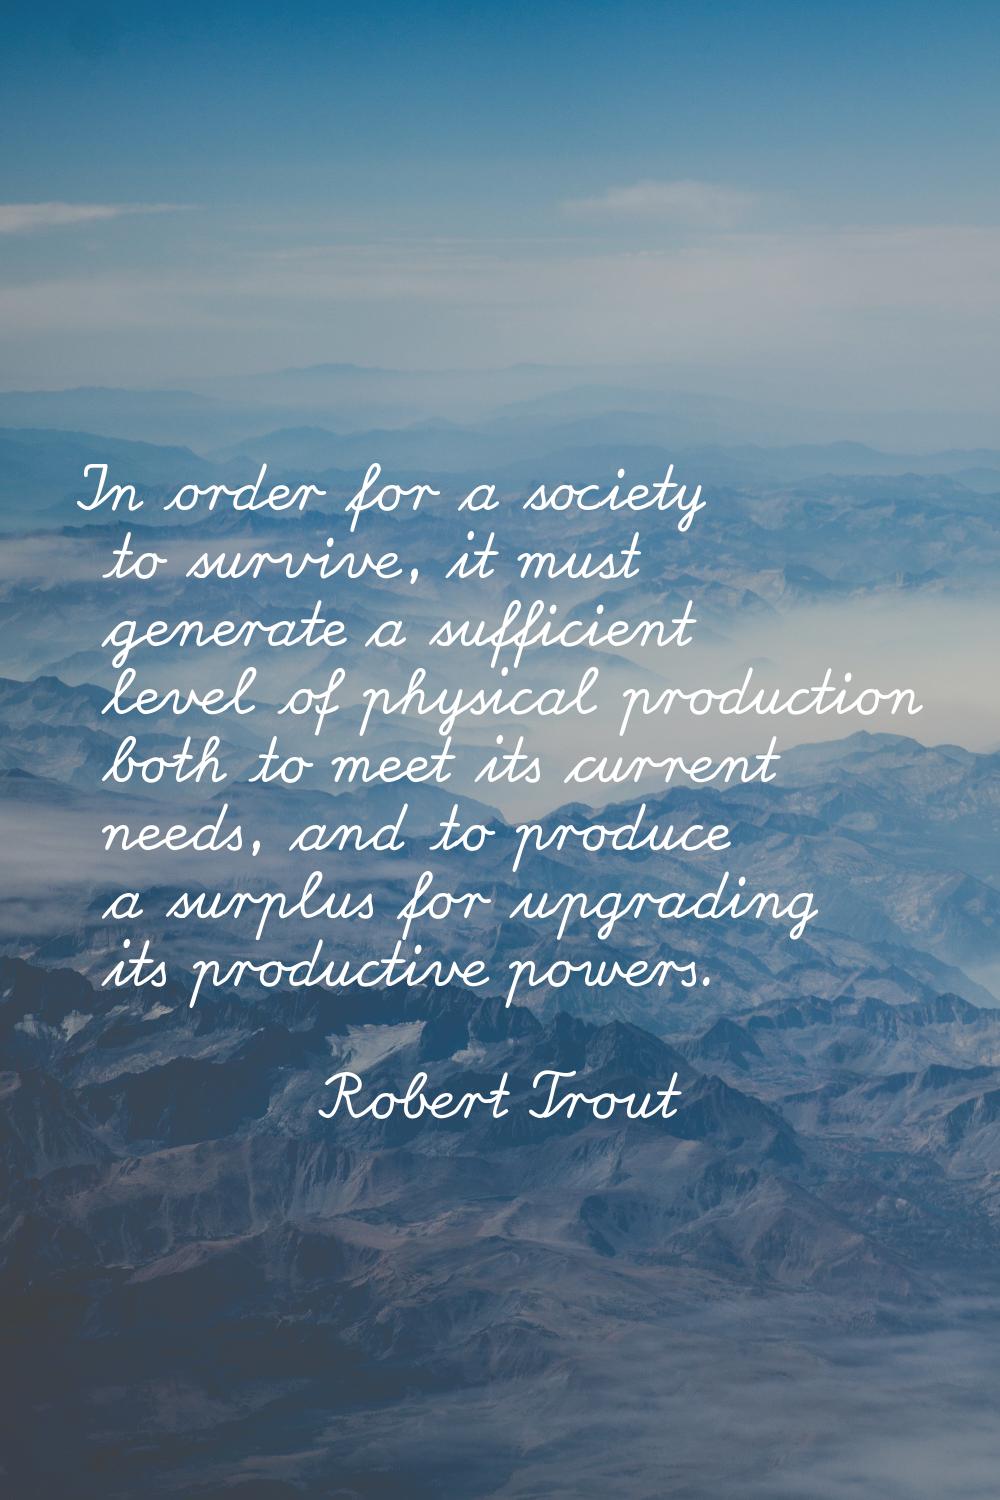 In order for a society to survive, it must generate a sufficient level of physical production both 